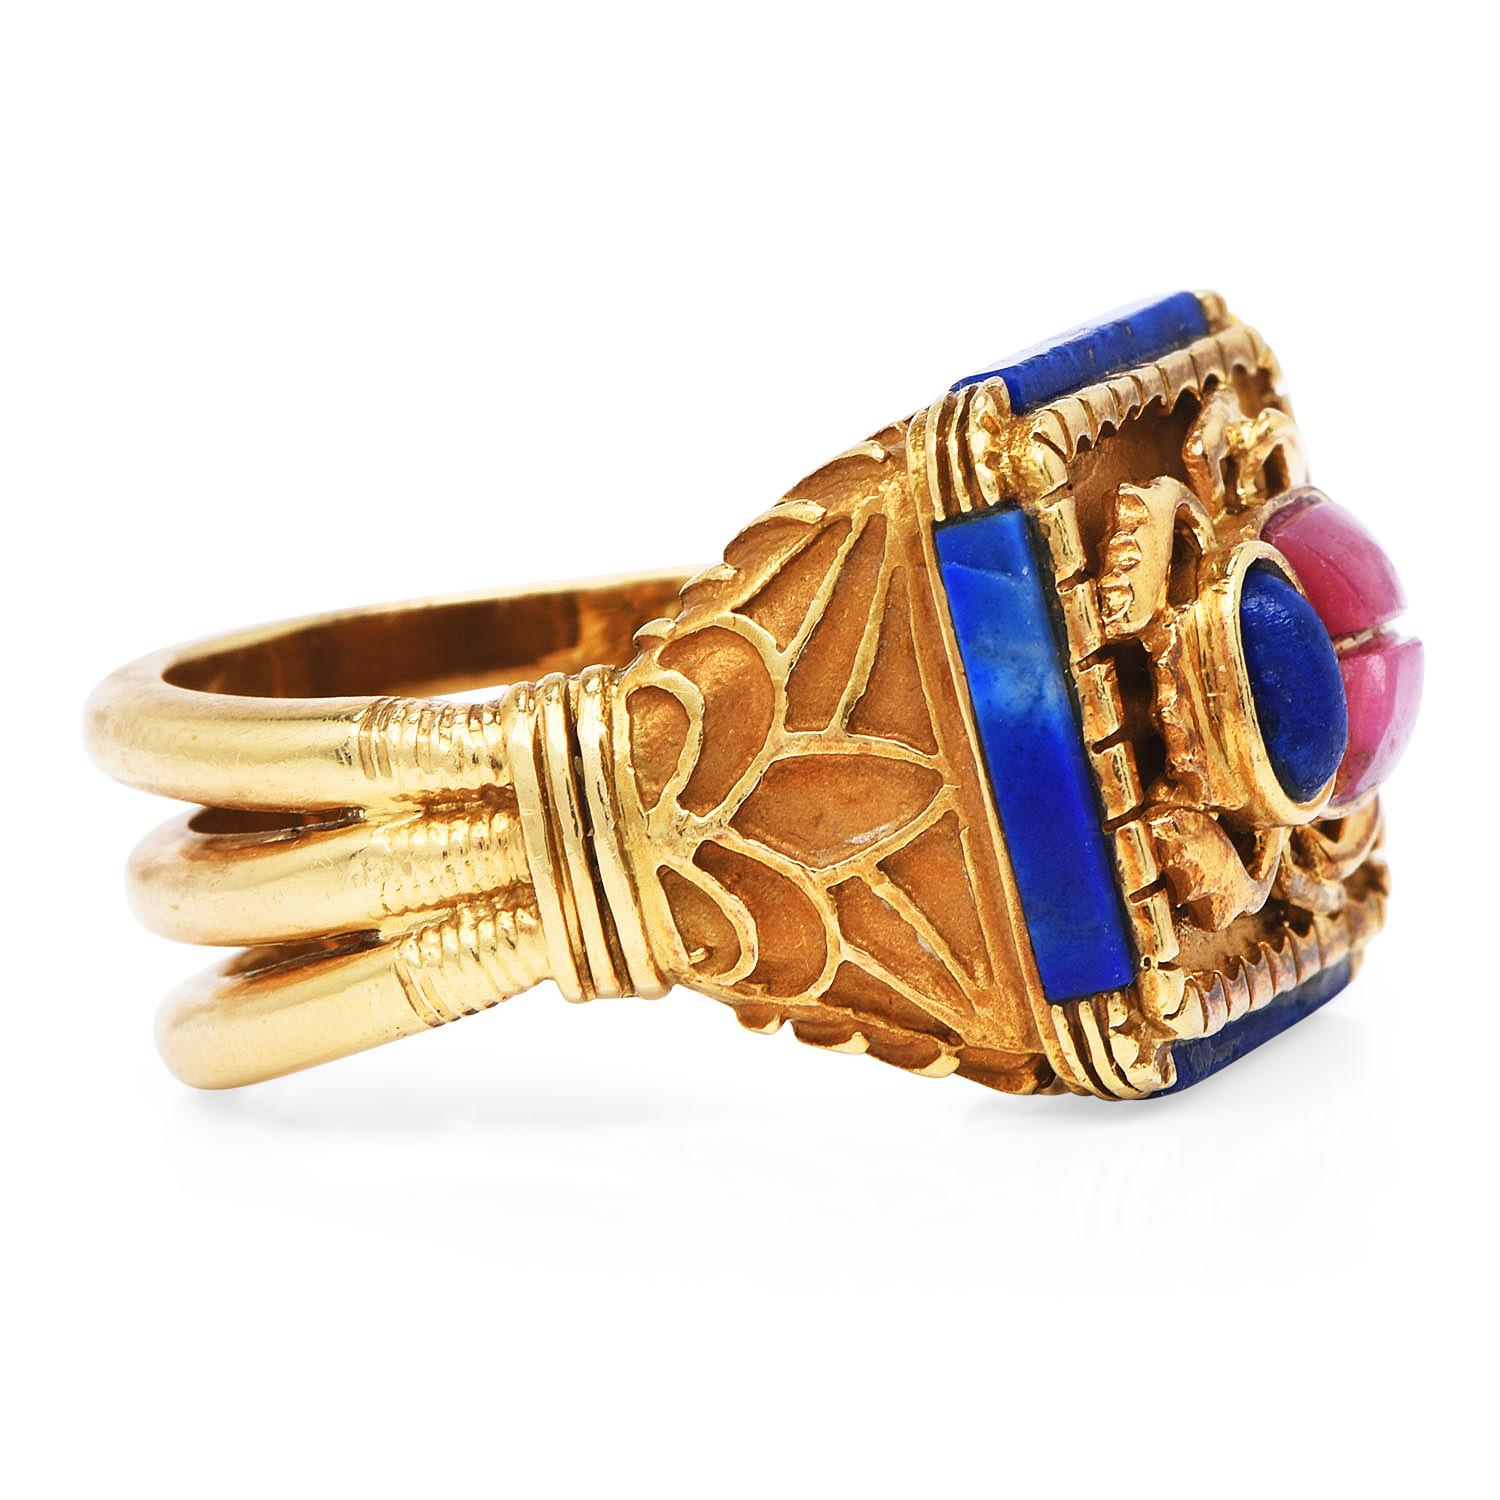 A Vintage ring with a mystical intricate design, centered by an Egyptian scarab and sided by Fleur de Lis accents.

Create an exceptional look with this prominent ring!

The center scarab design has two cabochon rhodochrosite gemstones, measuring